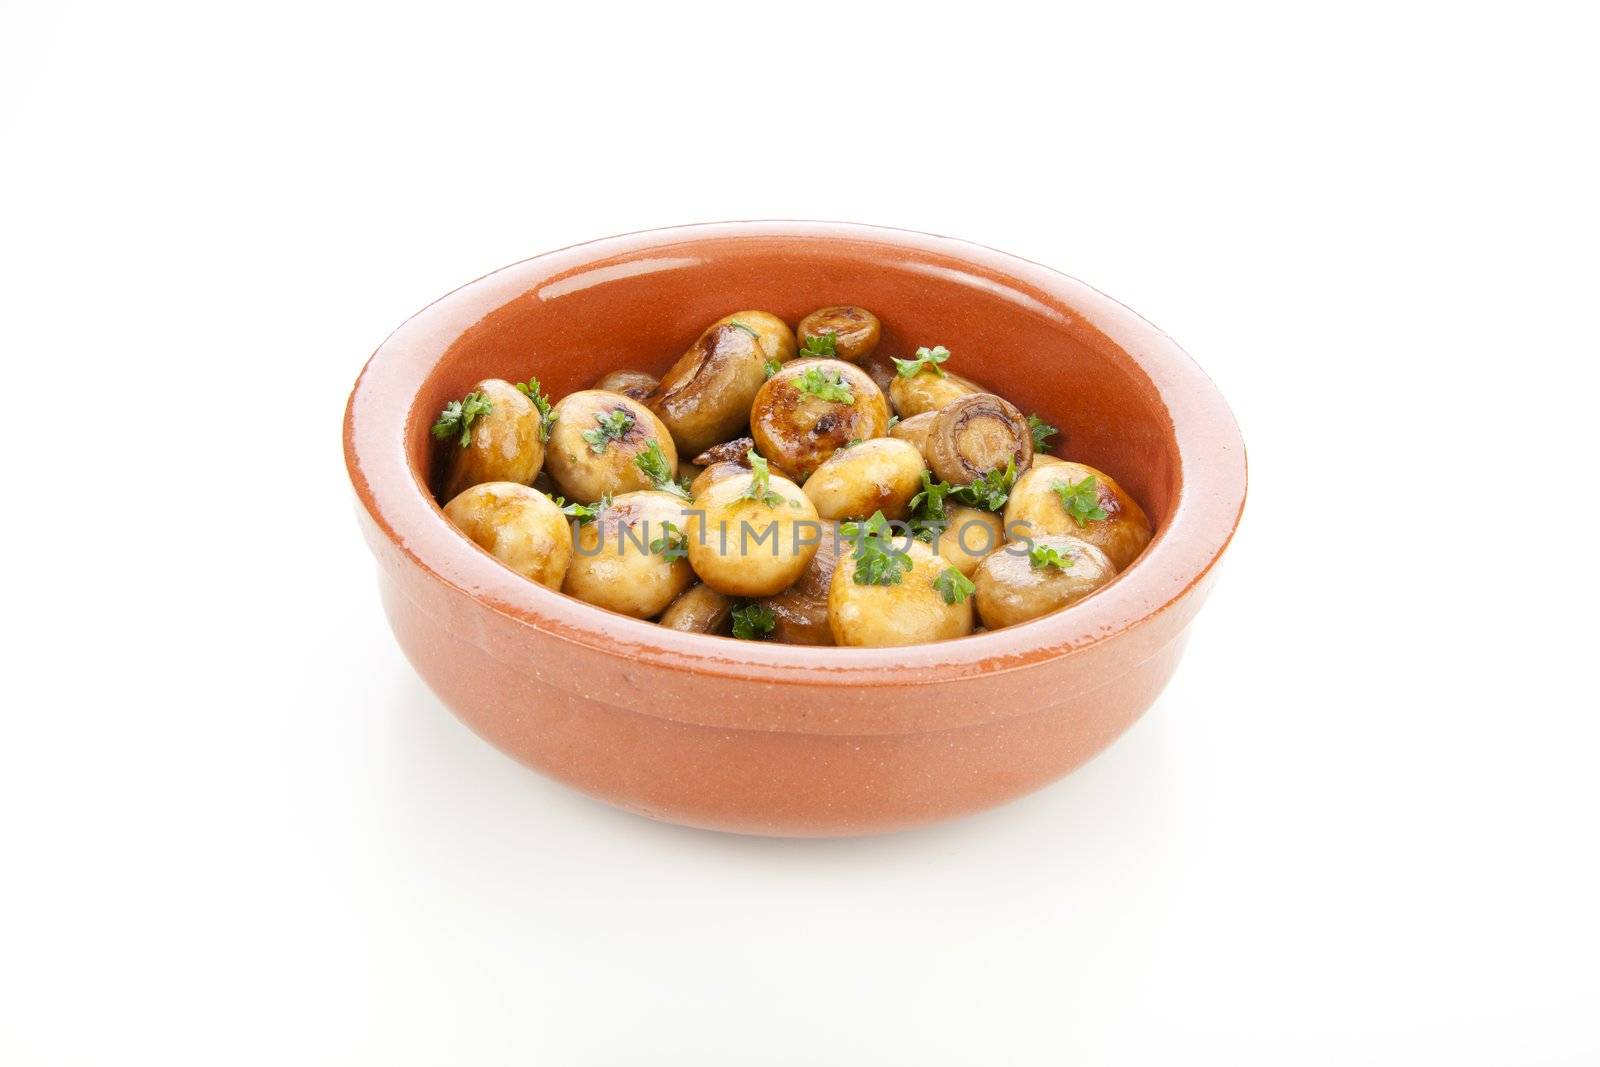 Marinated mushrooms in earthenware bowl isolated on white background.